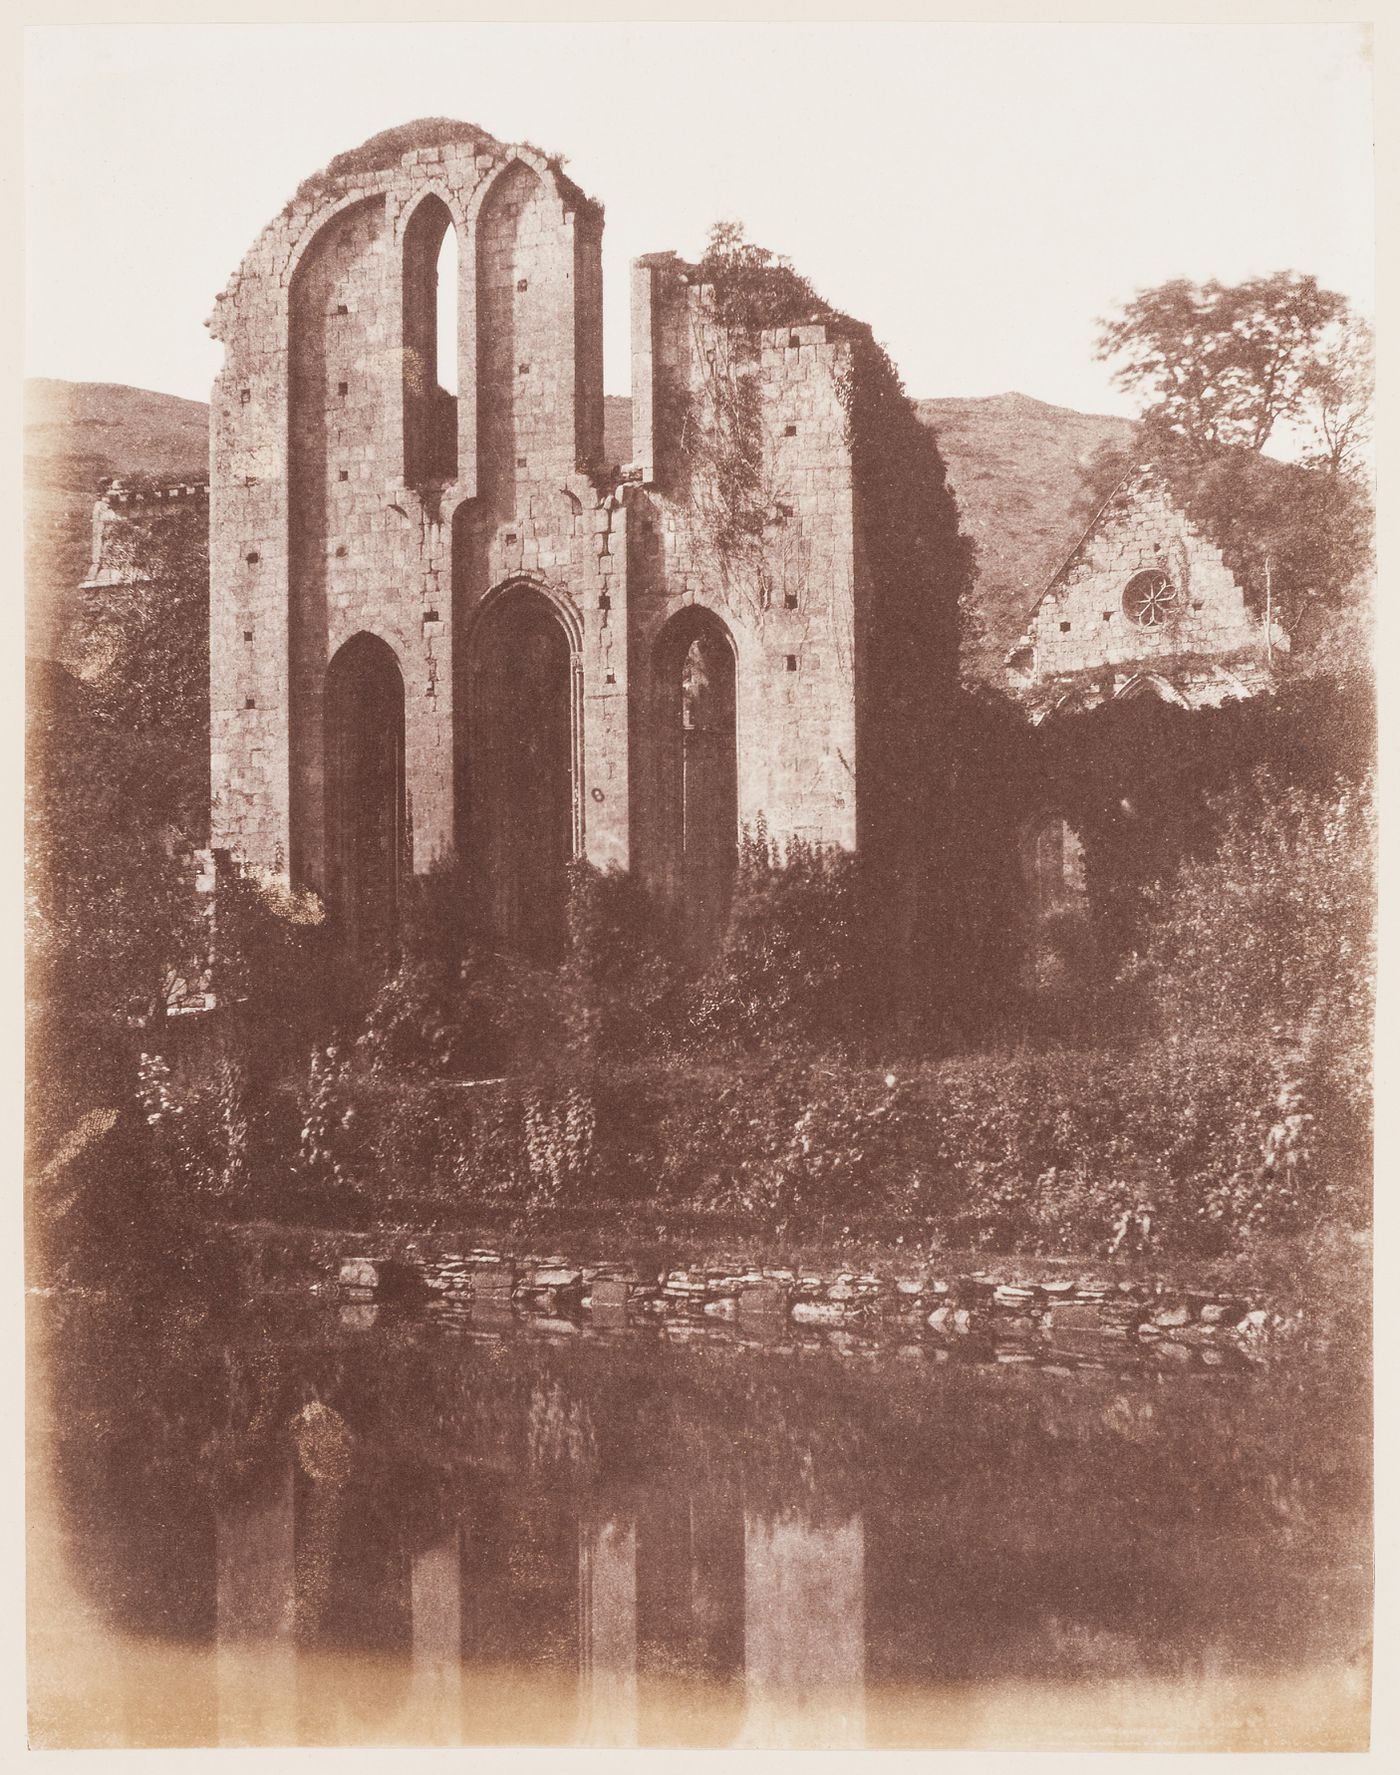 "Vallecrucis Abbey (front view)," North Wales